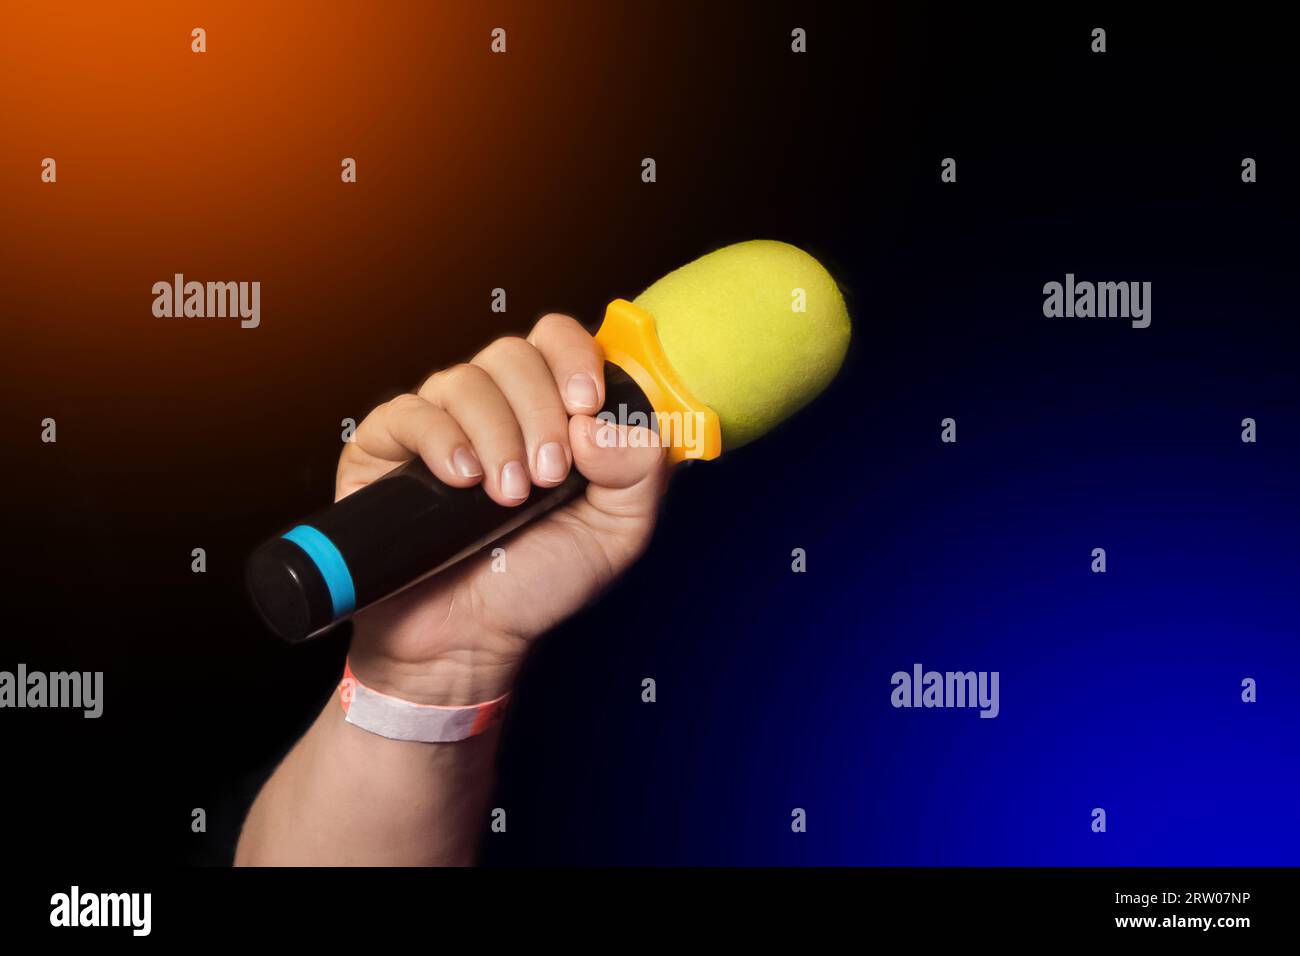 Female person hand close-up holding microphone professional karaoke singing equipment on black color background. Stock Photo